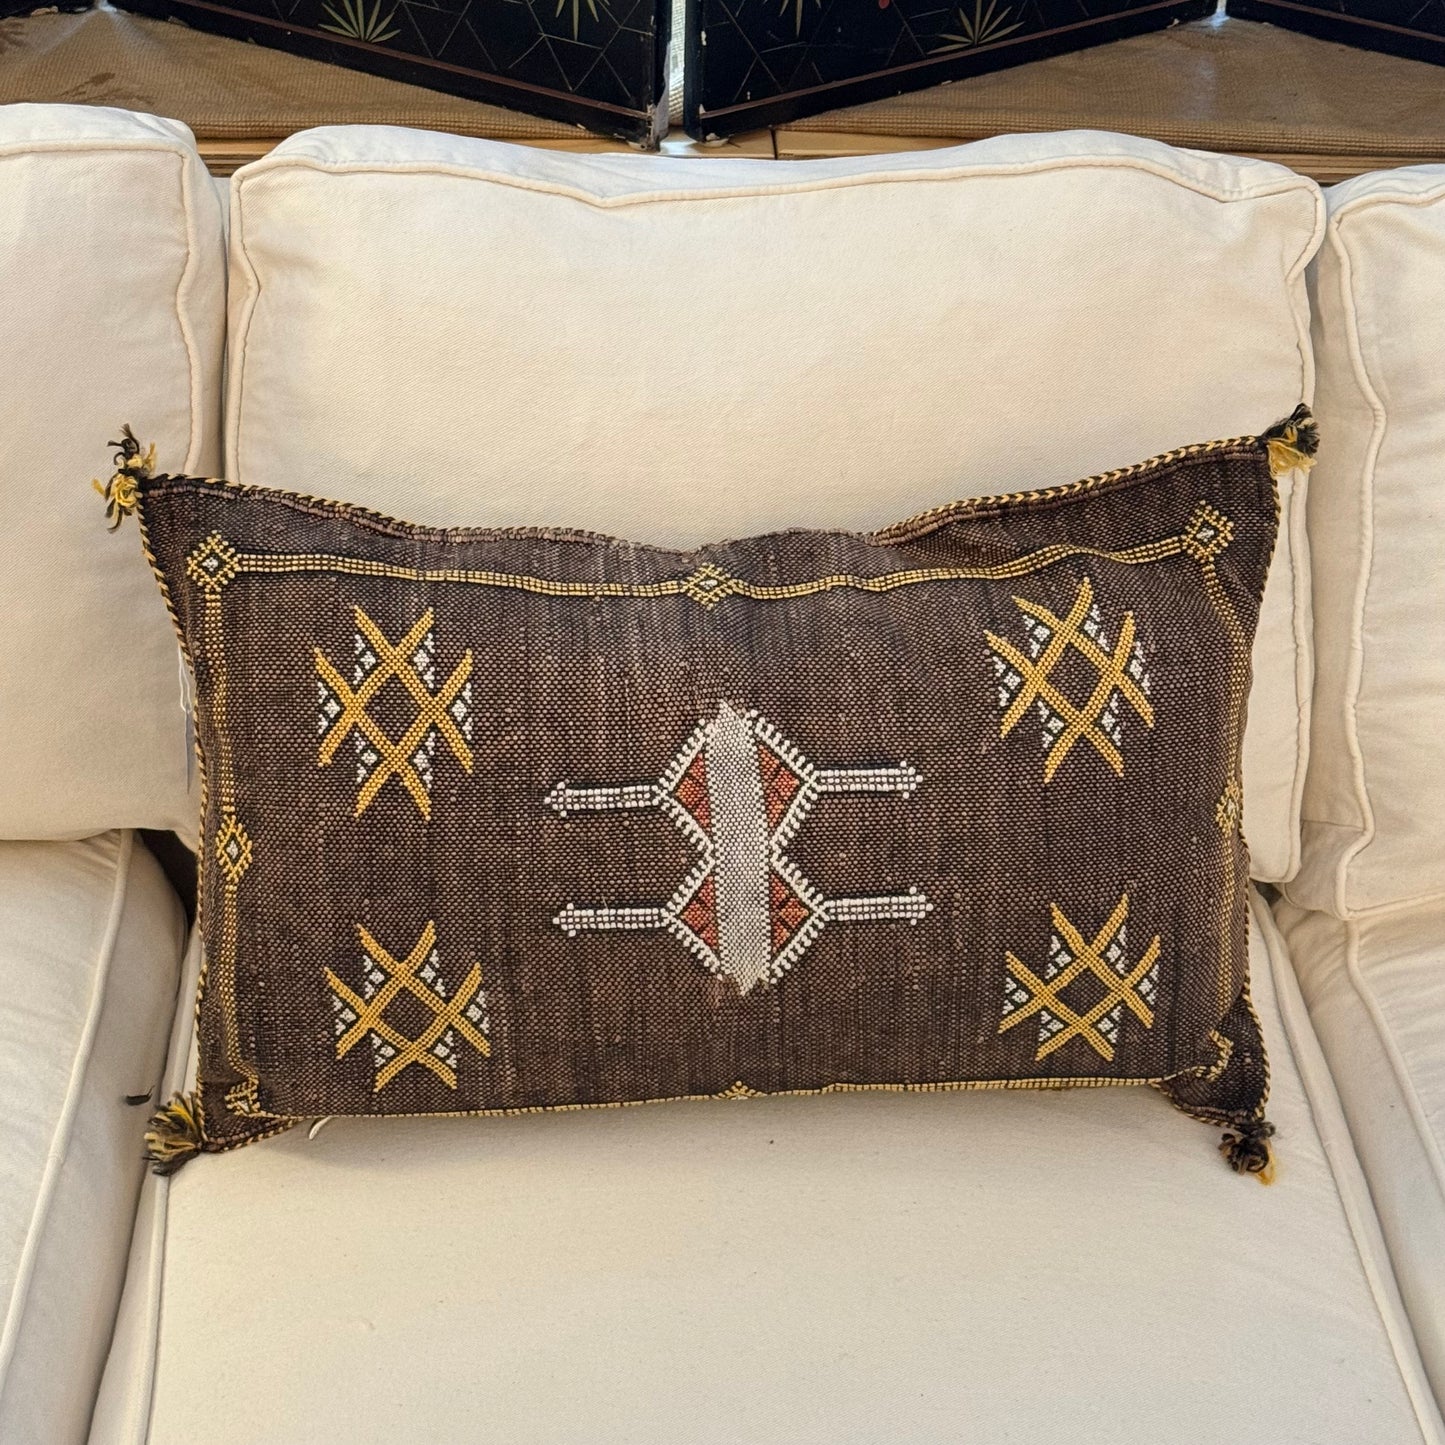 Moroccan Silk Pillows: The Mayta Collection